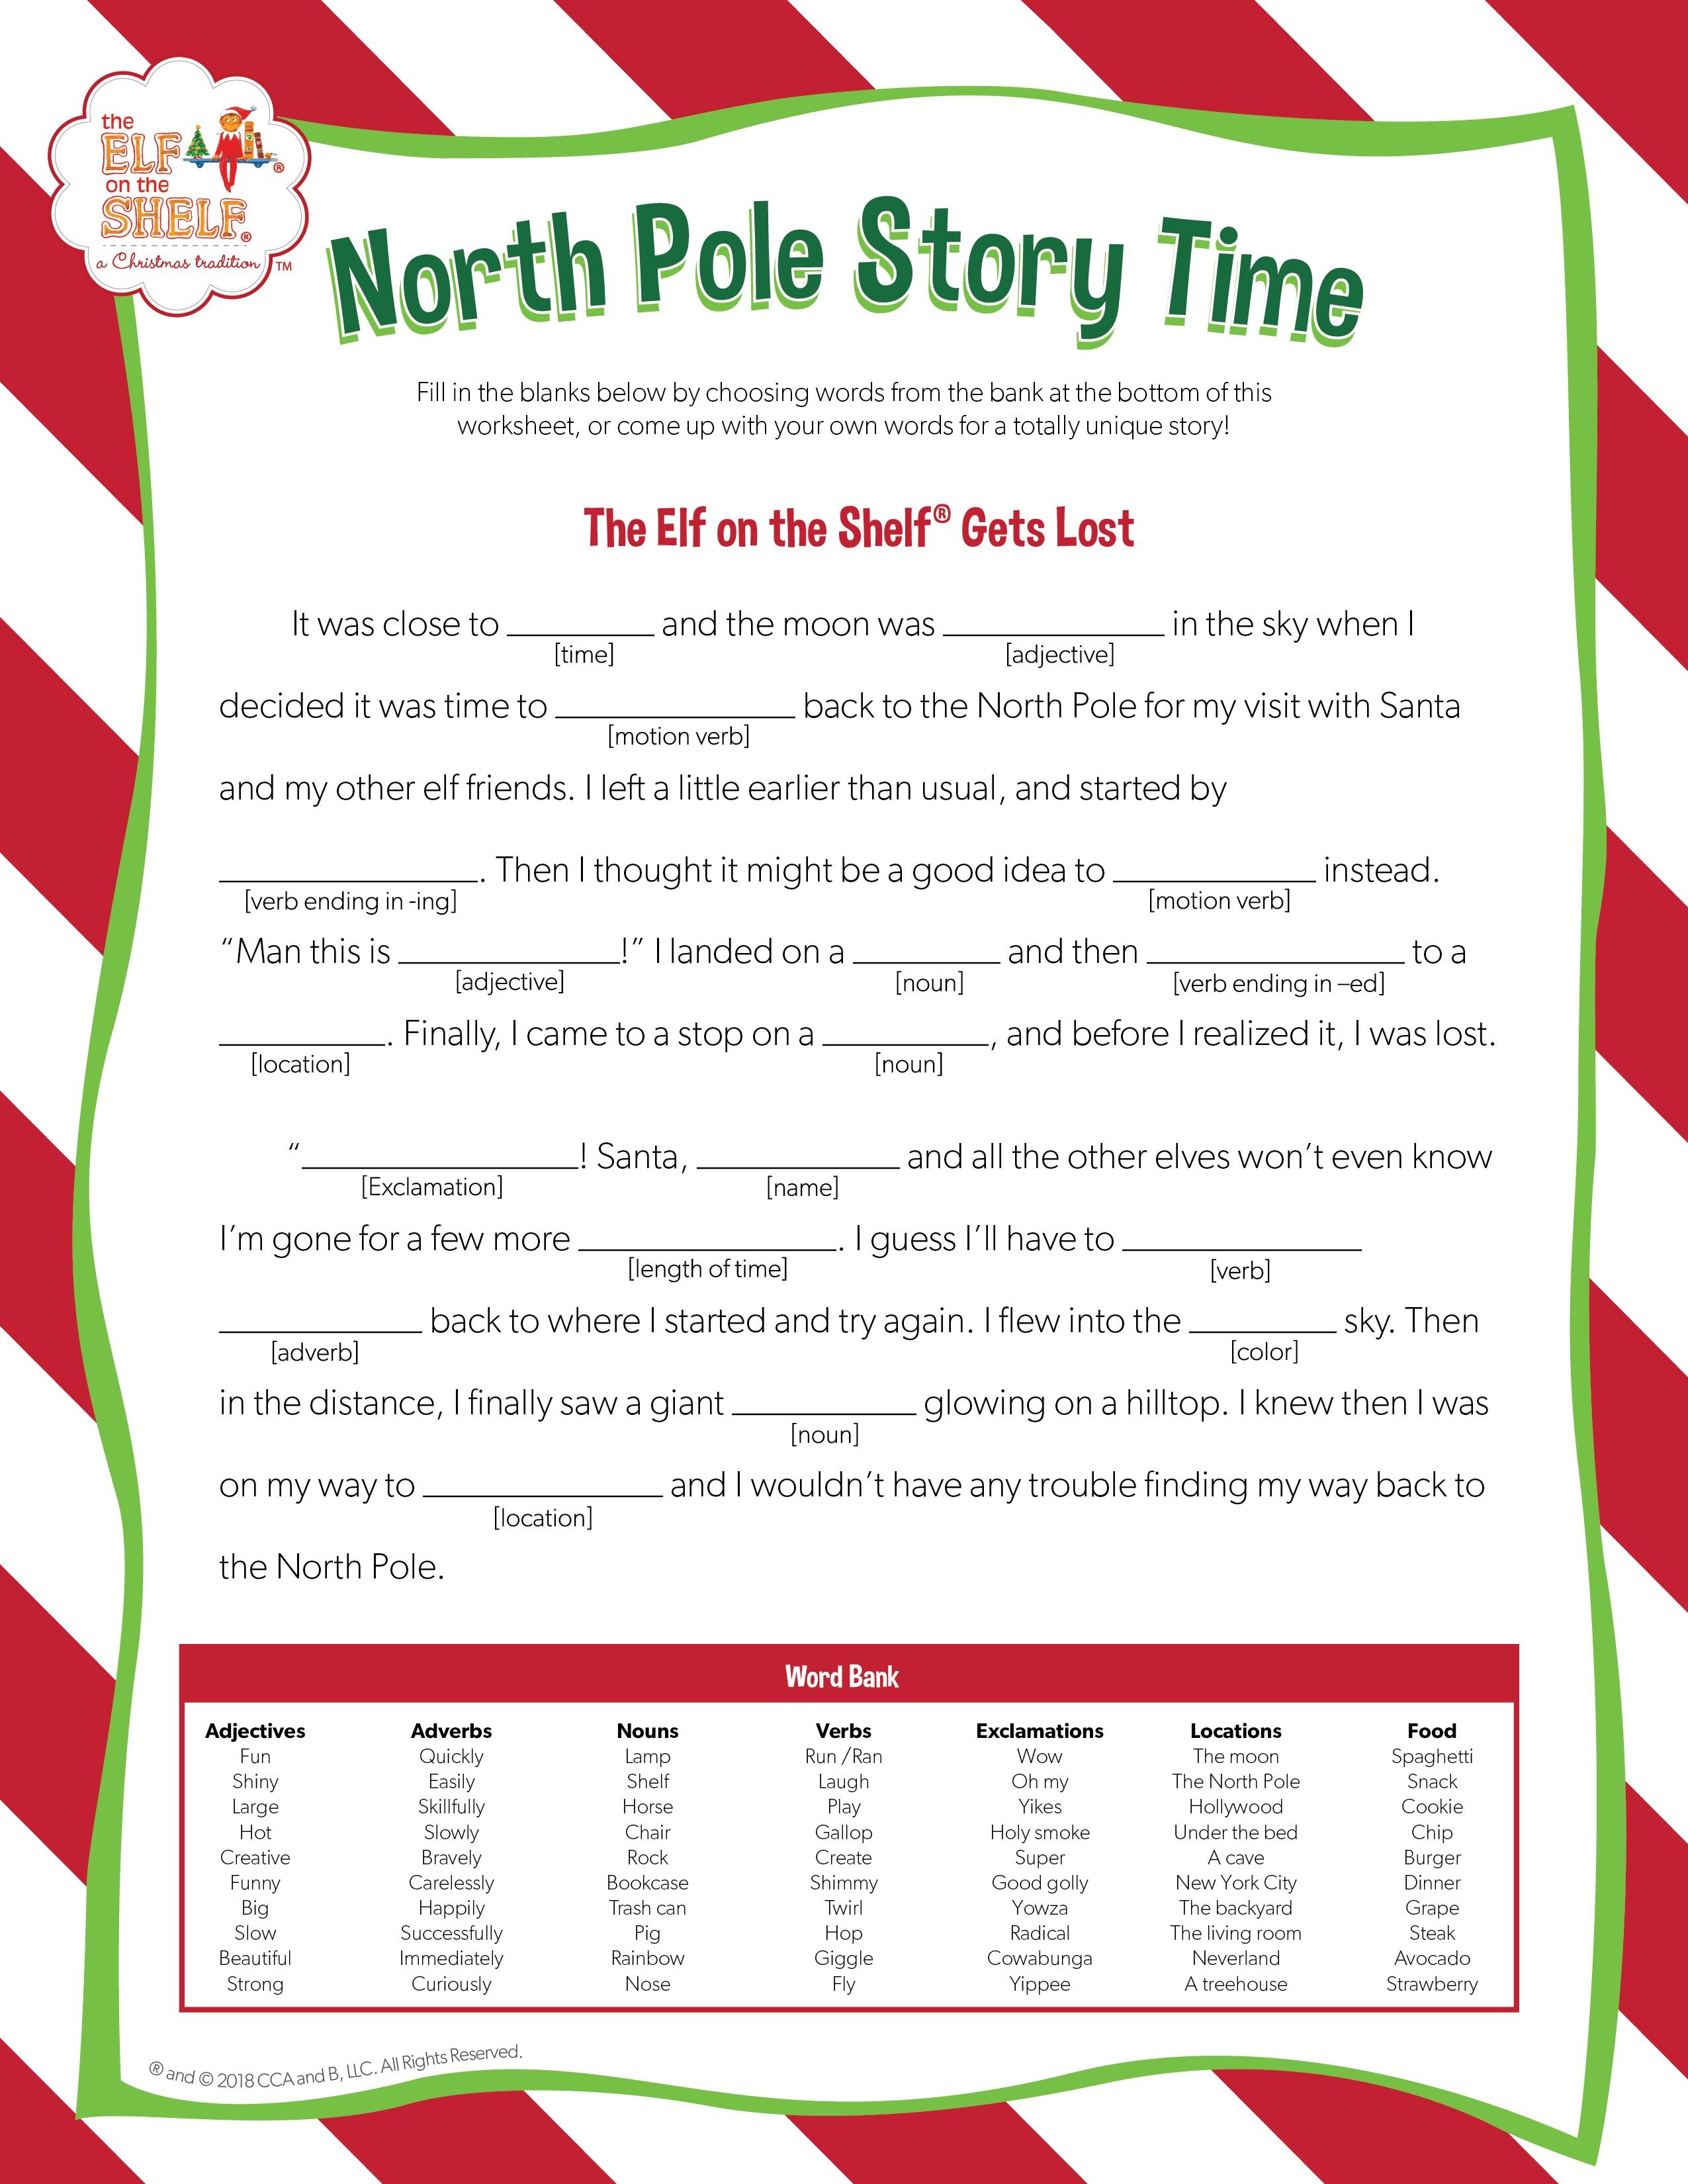 Vacation Time? Download These ... - The Elf on the Shelf